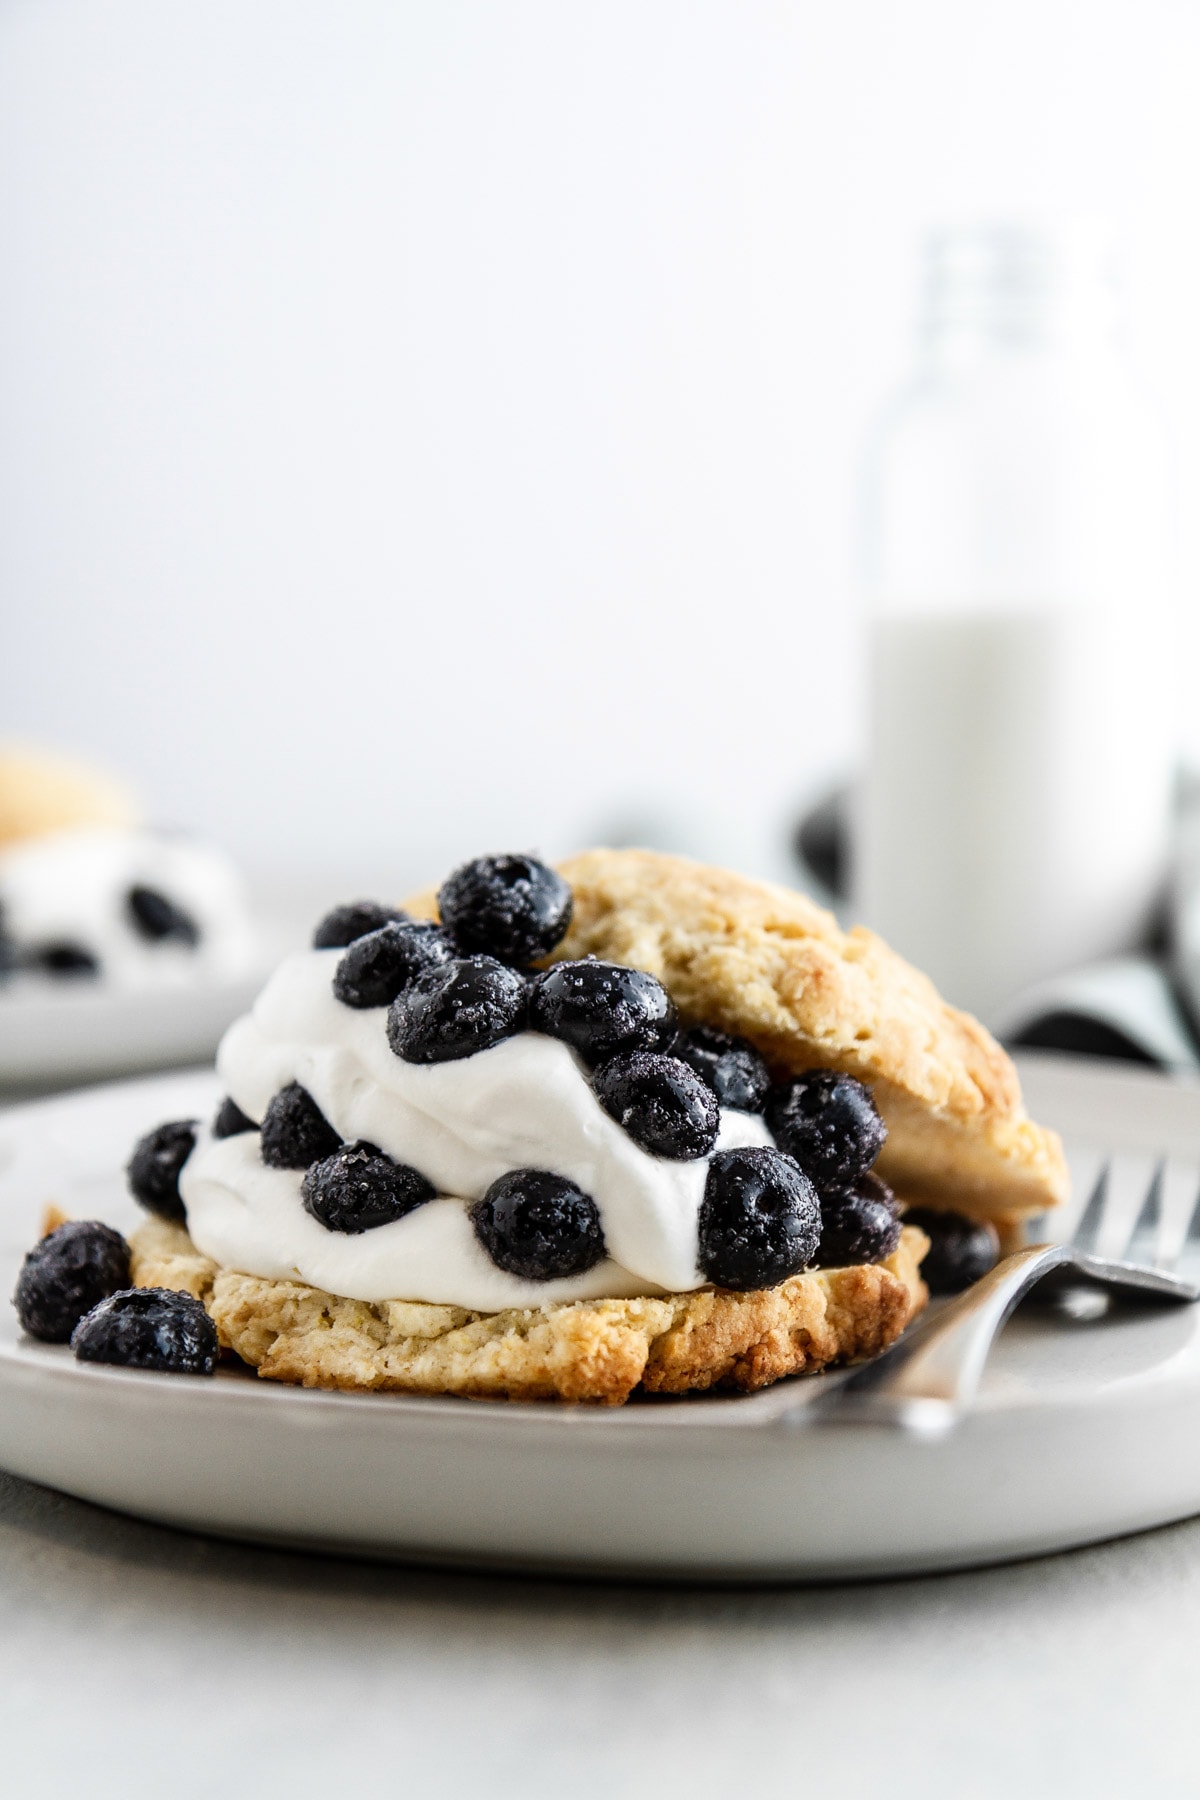 blueberry shortcake on a plate with a glass of milk in the background